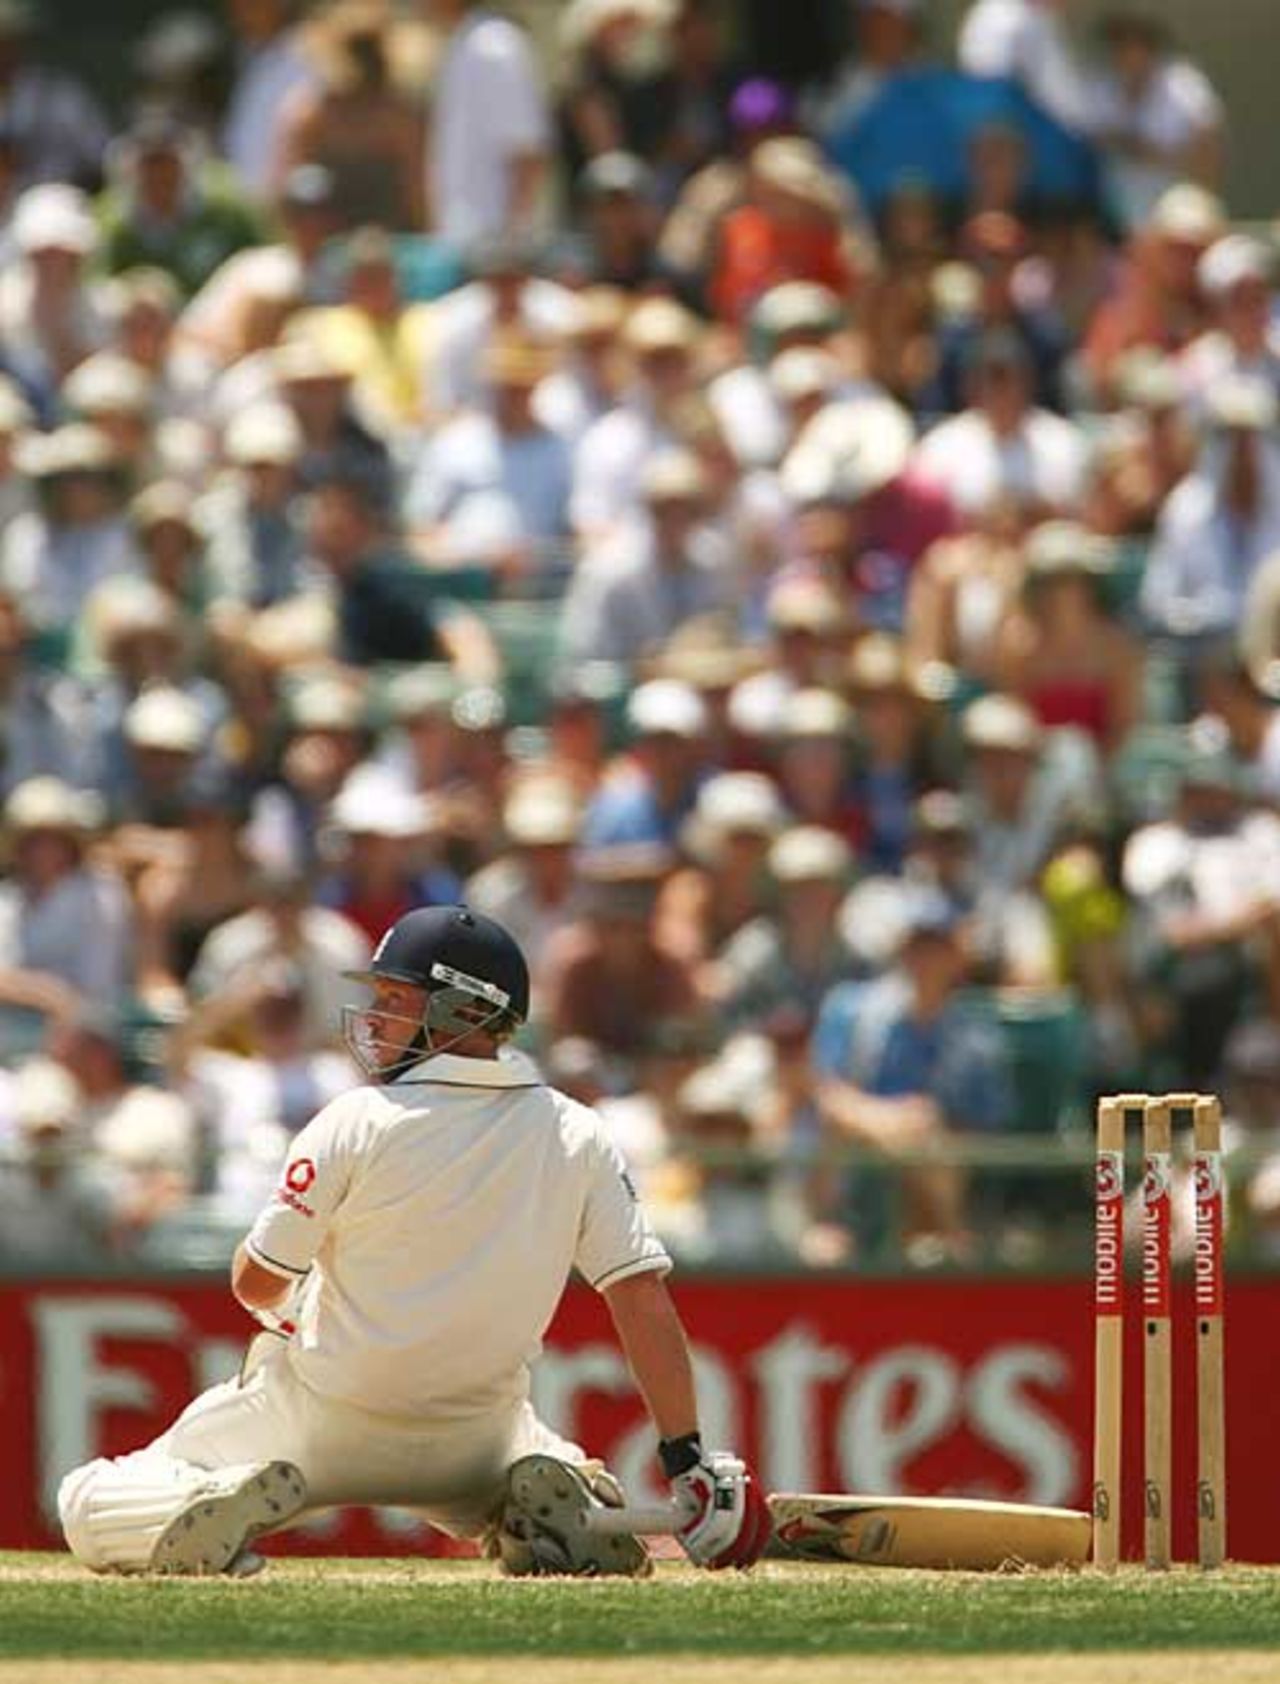 Ian Bell does the limbo to evade a short ball during his 87, Australia v England, 3rd Test, Perth, December 17, 2006